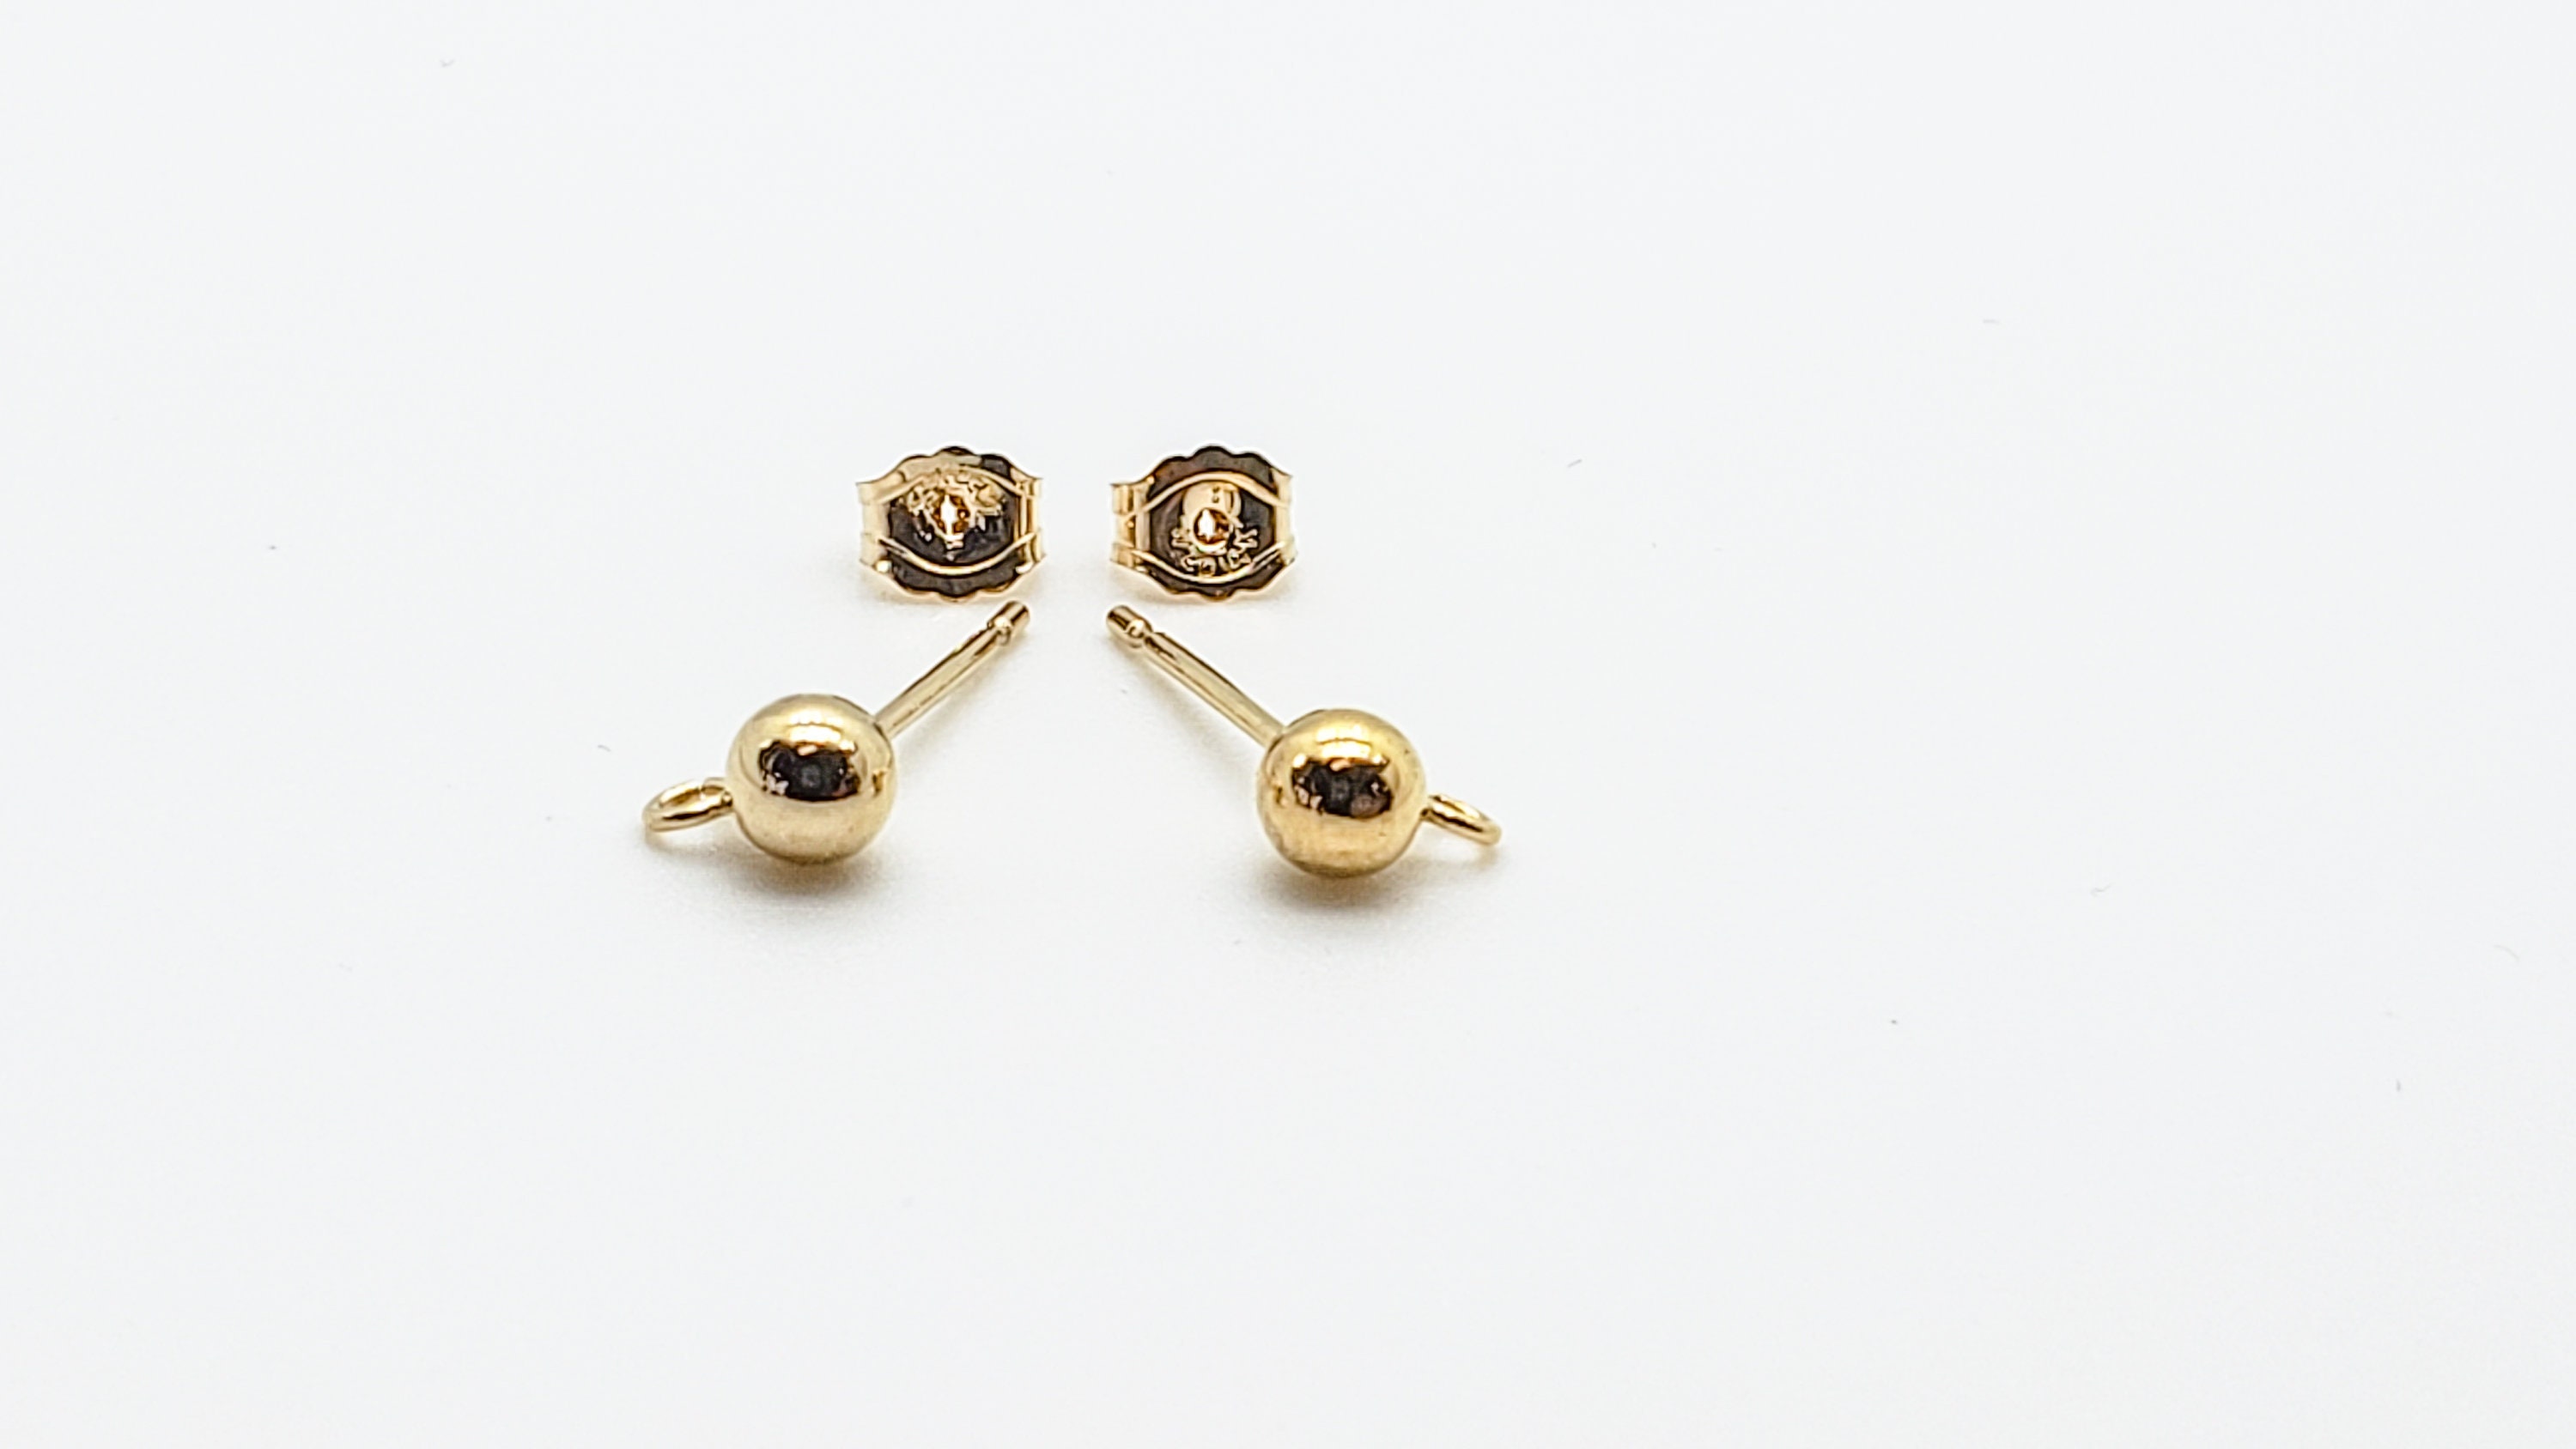 2pcs - Gold Round Post Earrings, Round Twist Stud Earrings, Jewelry Making, Gift for Her, 14K Gold Tone [MS0094-PG]